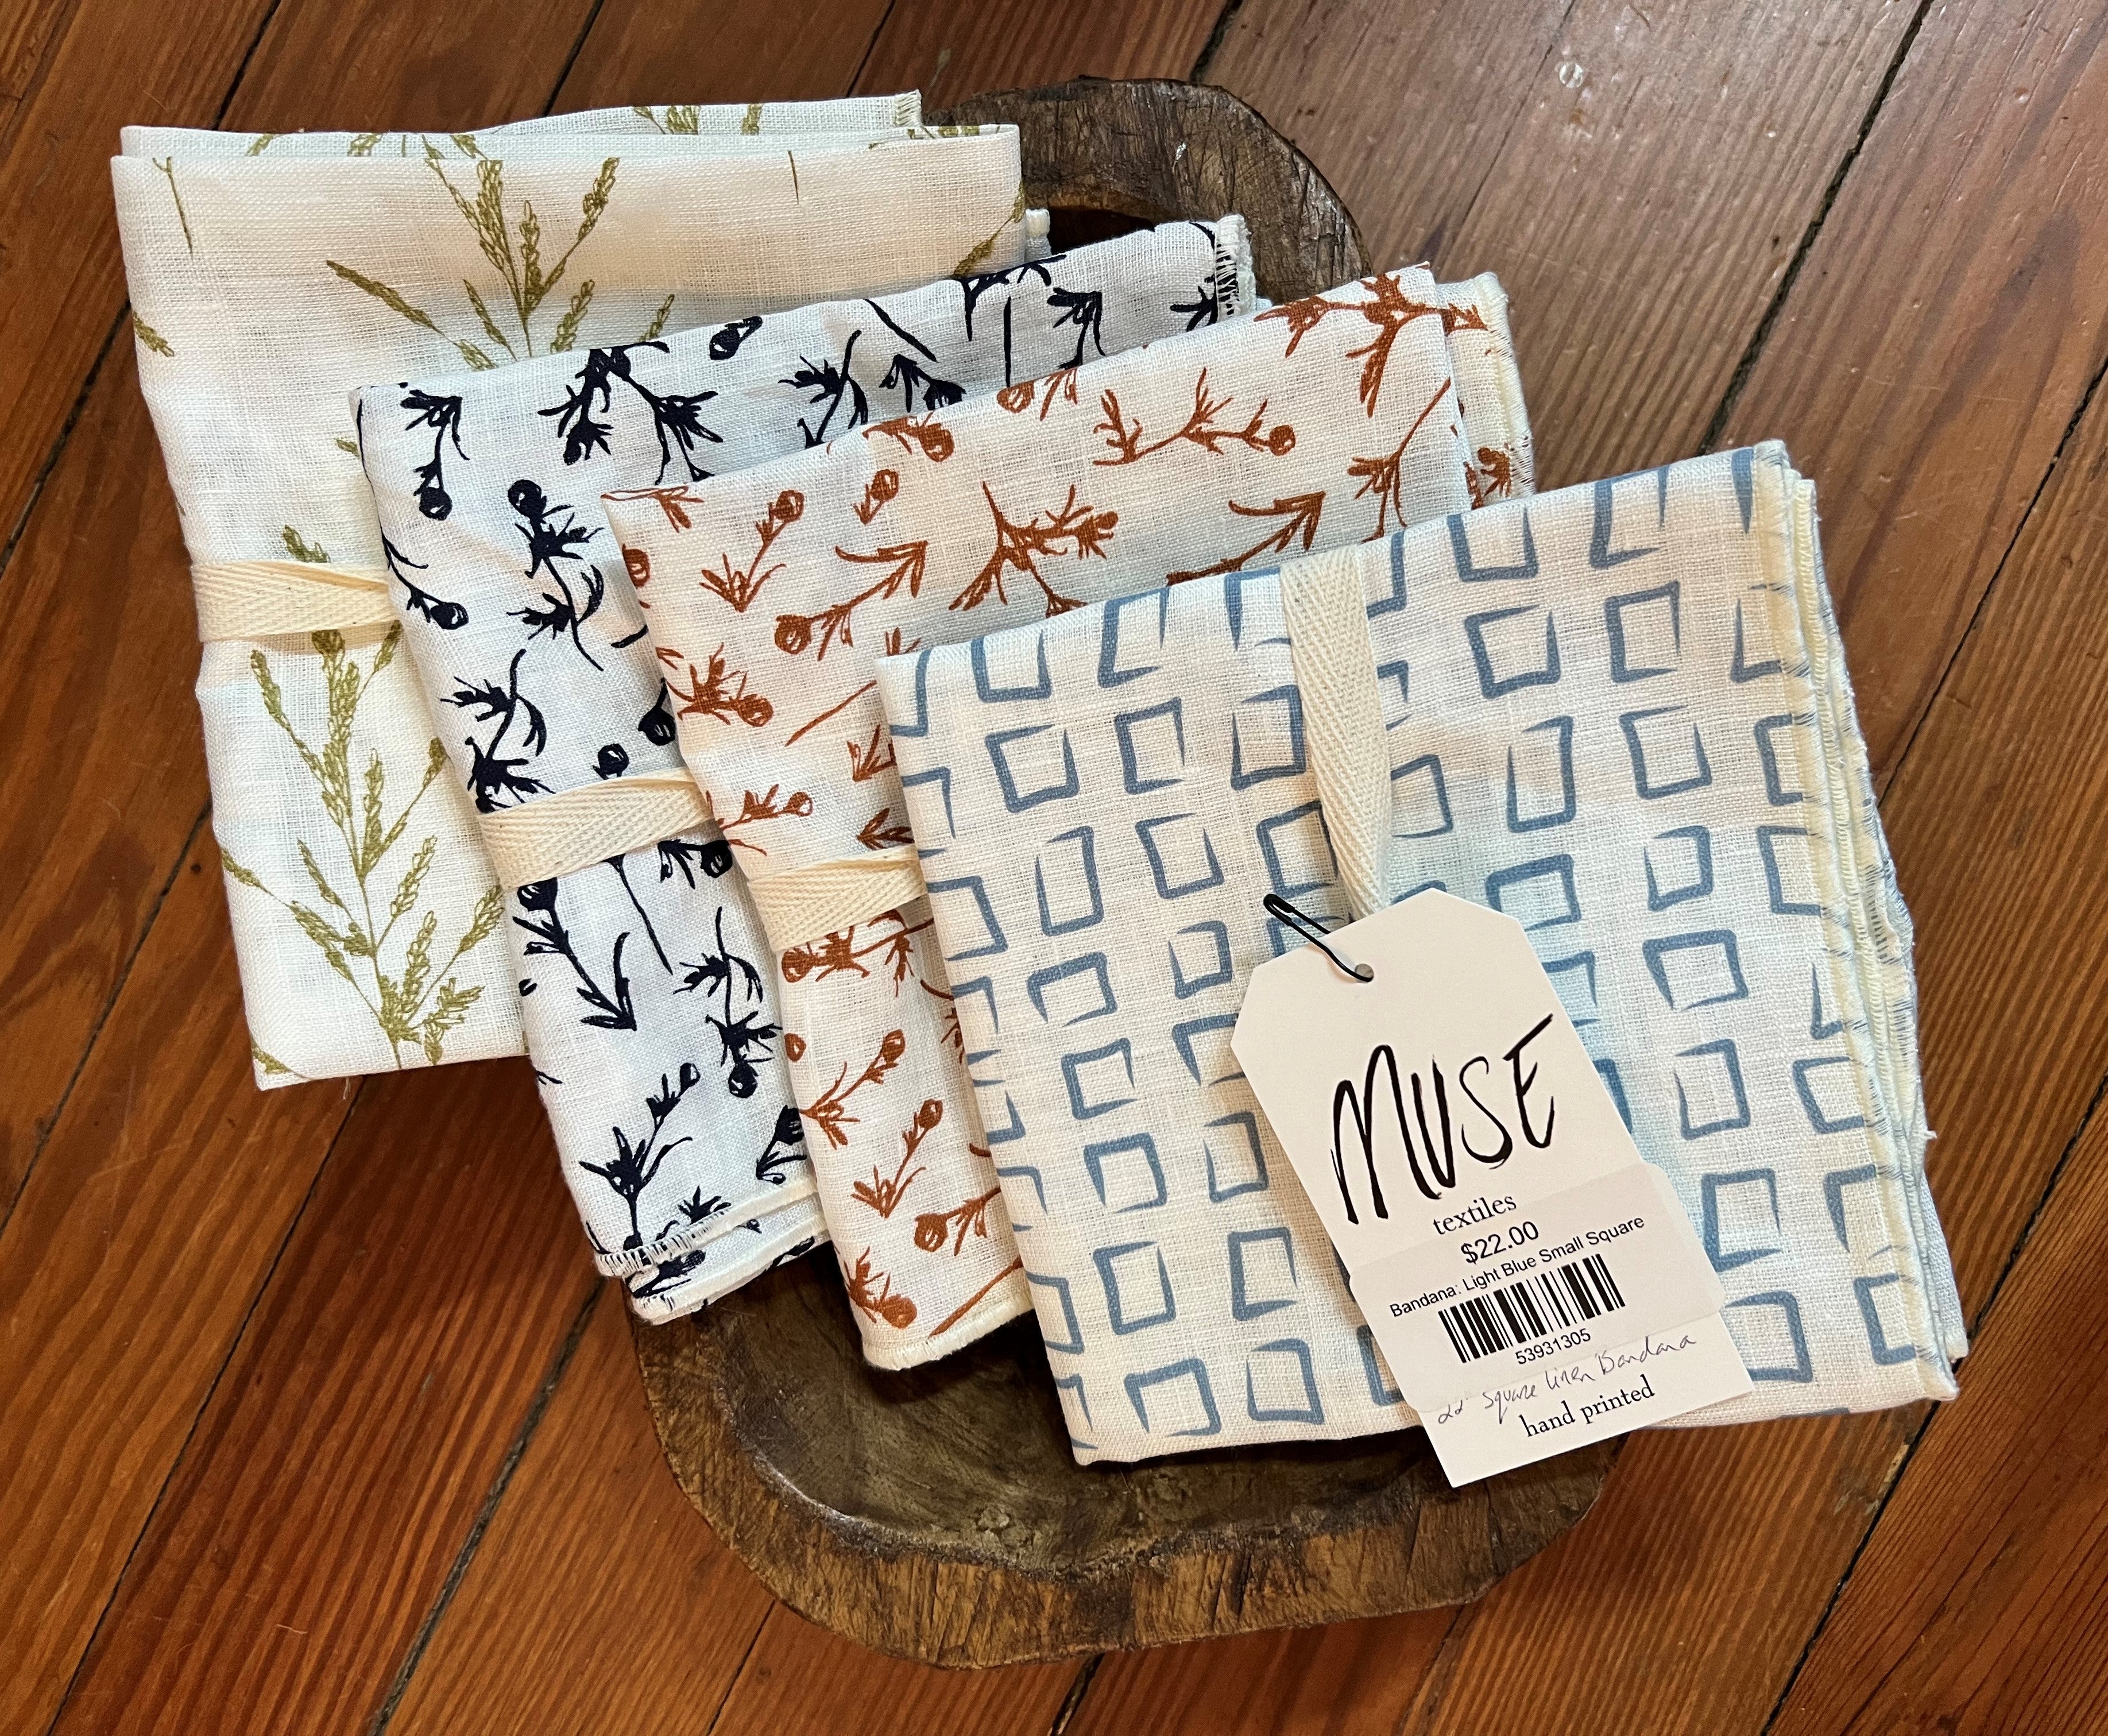 Handmade textiles: Locally made and designed, you will love these textiles! They are typically designed from nature and are in a variety of colors and patterns. These are beautiful!